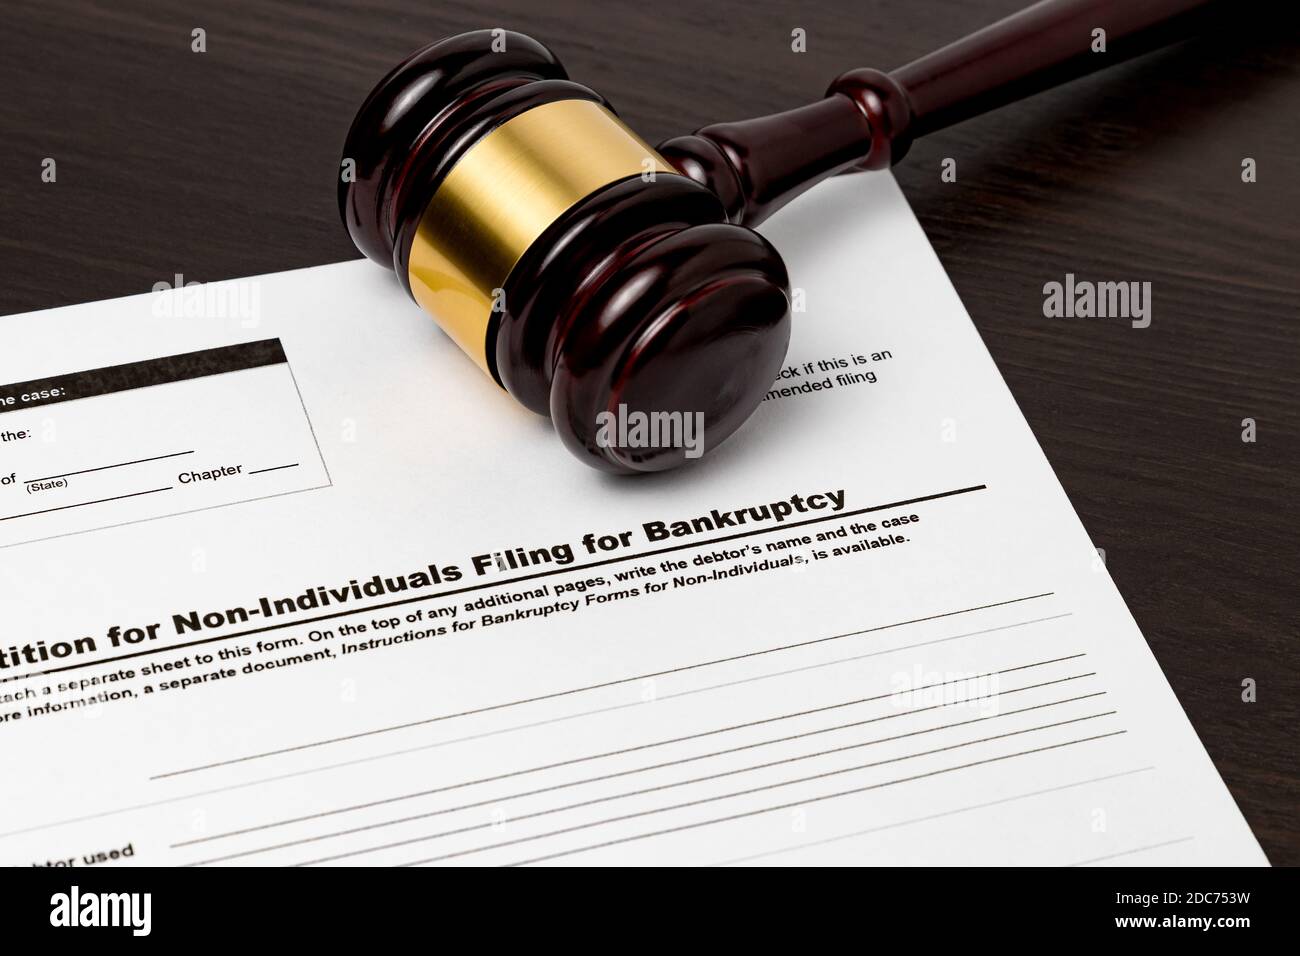 Business bankruptcy petition with gavel. Concept of financial and unemployment crisis, small business debt, economy and recession. Stock Photo